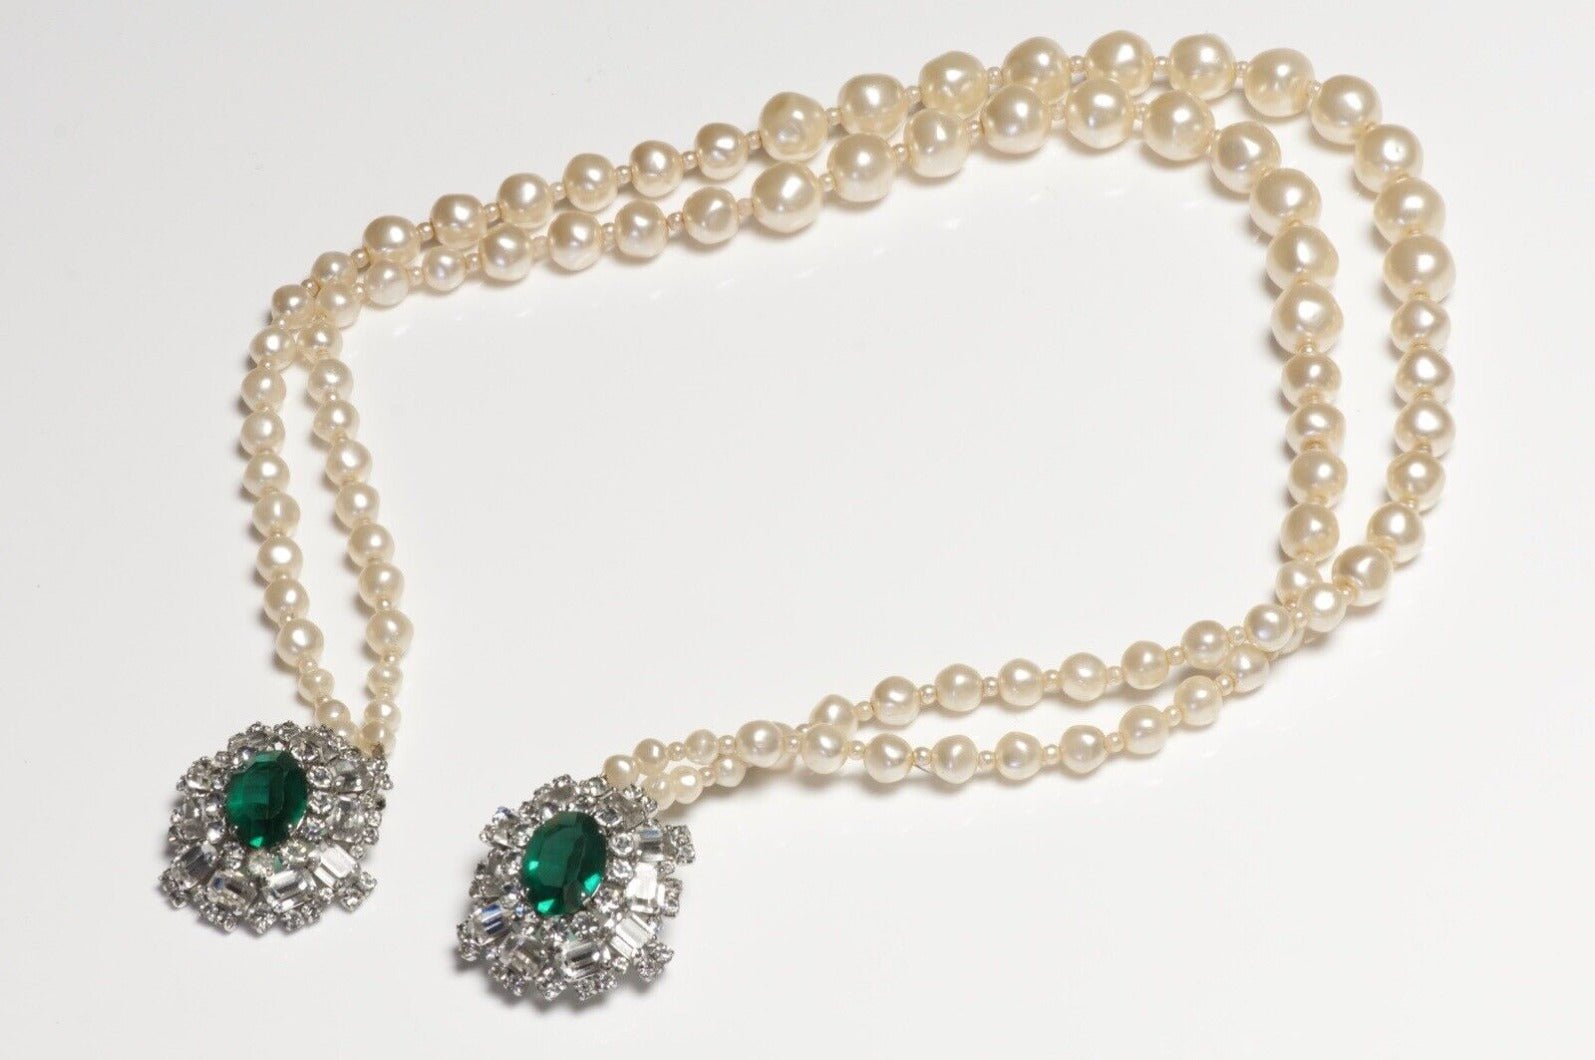 Christian Dior 1961 Marc Bohan Pearl Green Crystal Double Brooch Necklace